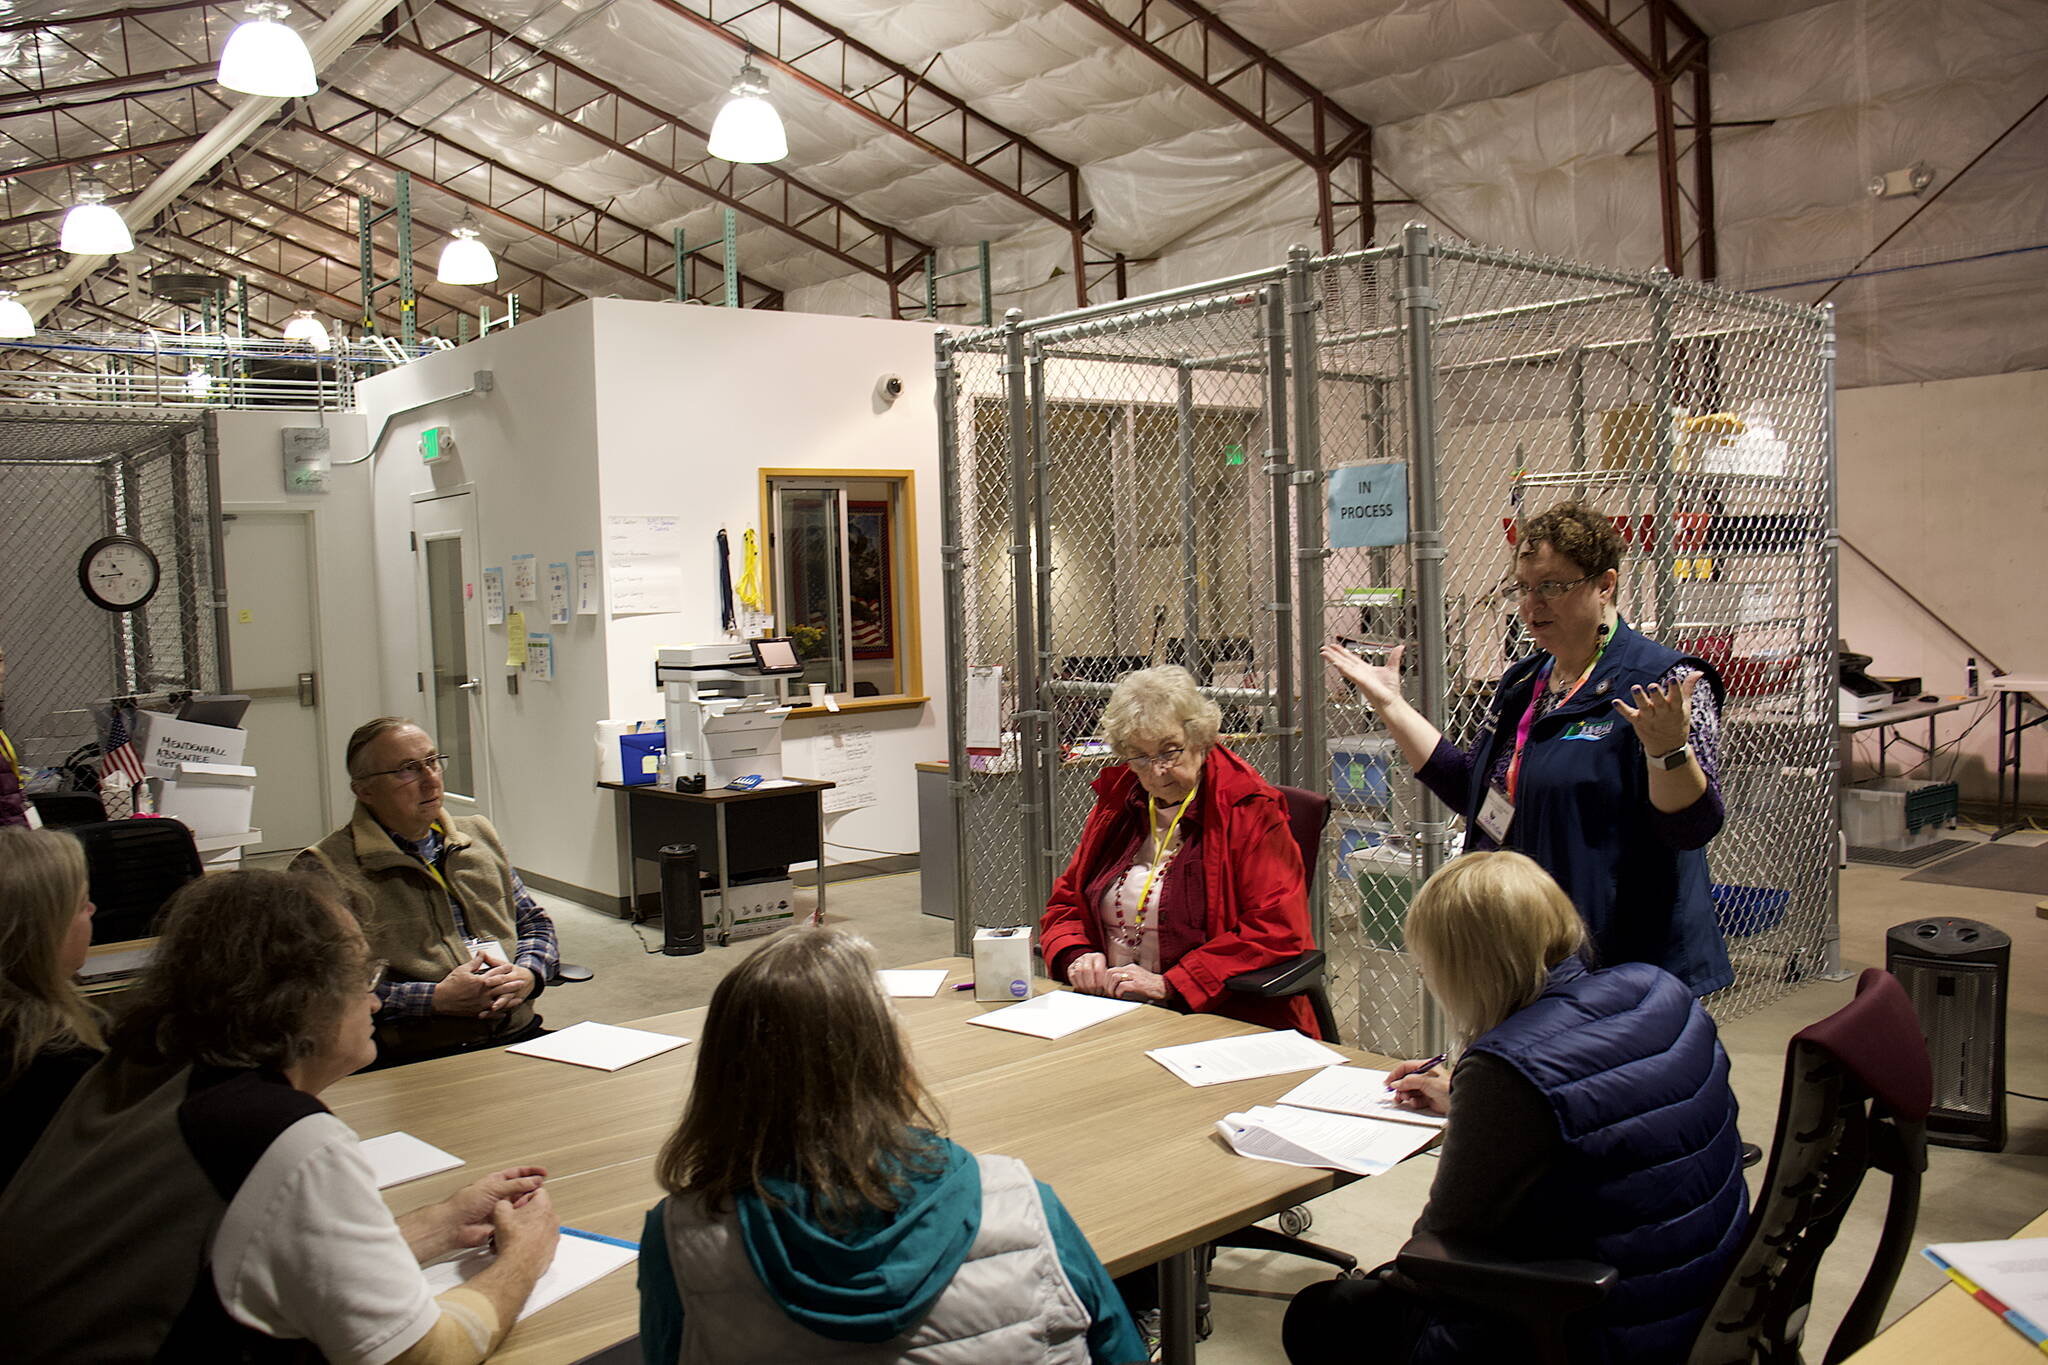 Juneau City Clerk Beth McEwen explains the ballot certification process to election workers Monday at the City and Borough of Juneau’s Ballot Processing Center. The results of the Oct. 3 municipal election were certified Tuesday. (Mark Sabbatini / Juneau Empire)